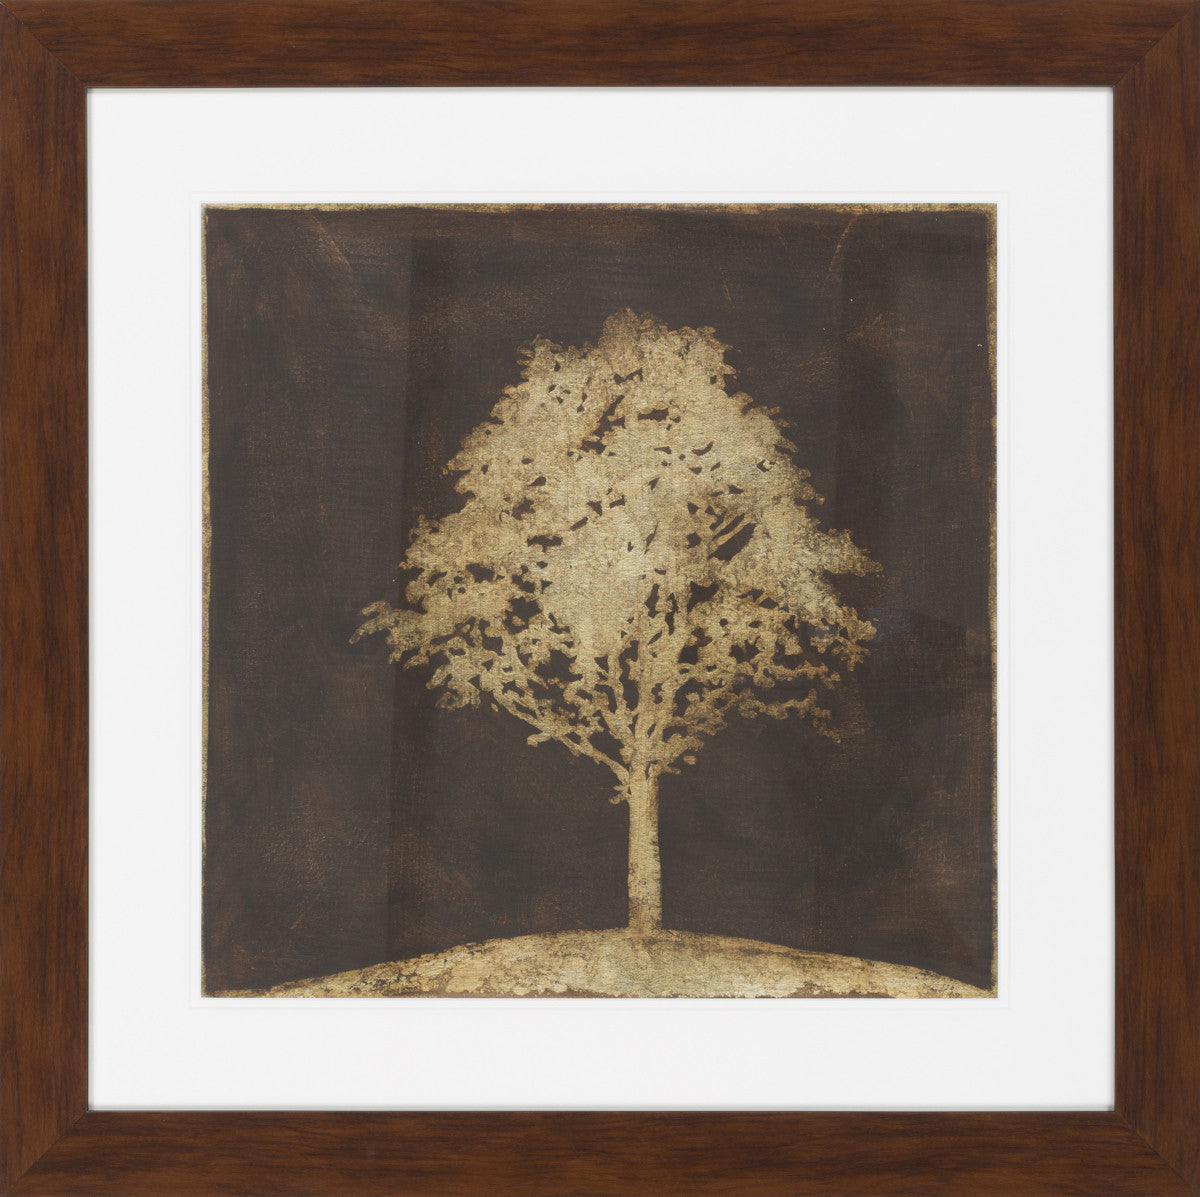 Surya Wall Decor LJ-4011 Brown by Megan Meagher main image